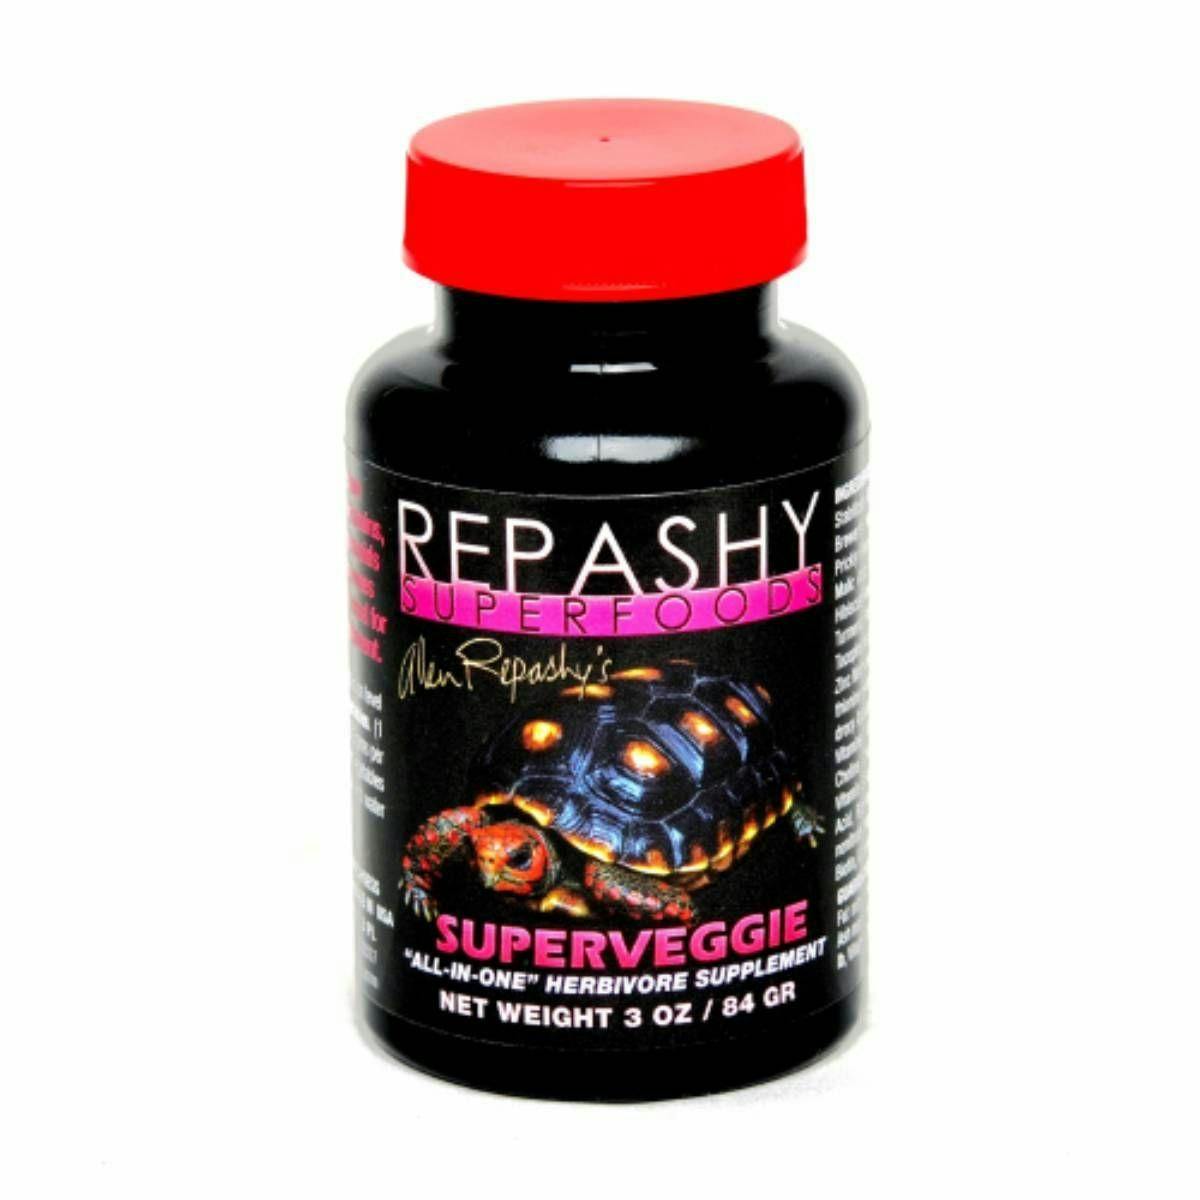 Image for Repashy SuperVeggie (3 oz) by Josh's Frogs